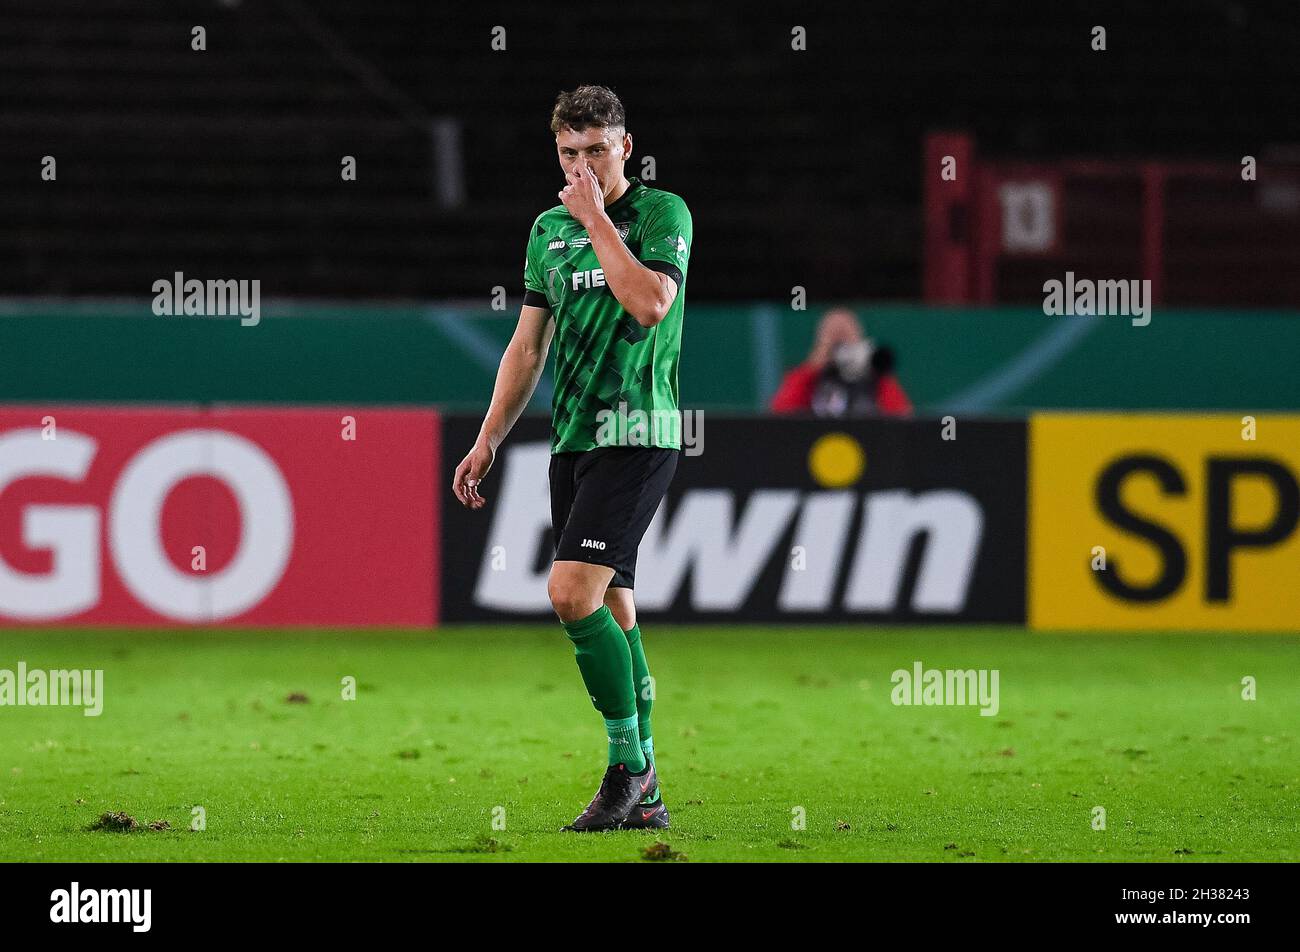 26 October 2021, North Rhine-Westphalia, Münster: Football: DFB Cup, Preußen Münster - Hertha BSC, 2nd round, Preußenstadion. Münster's Nicolai Remberg is sent off after receiving a yellow-red card. Photo: Guido Kirchner/dpa - IMPORTANT NOTE: In accordance with the regulations of the DFL Deutsche Fußball Liga and/or the DFB Deutscher Fußball-Bund, it is prohibited to use or have used photographs taken in the stadium and/or of the match in the form of sequence pictures and/or video-like photo series. Stock Photo